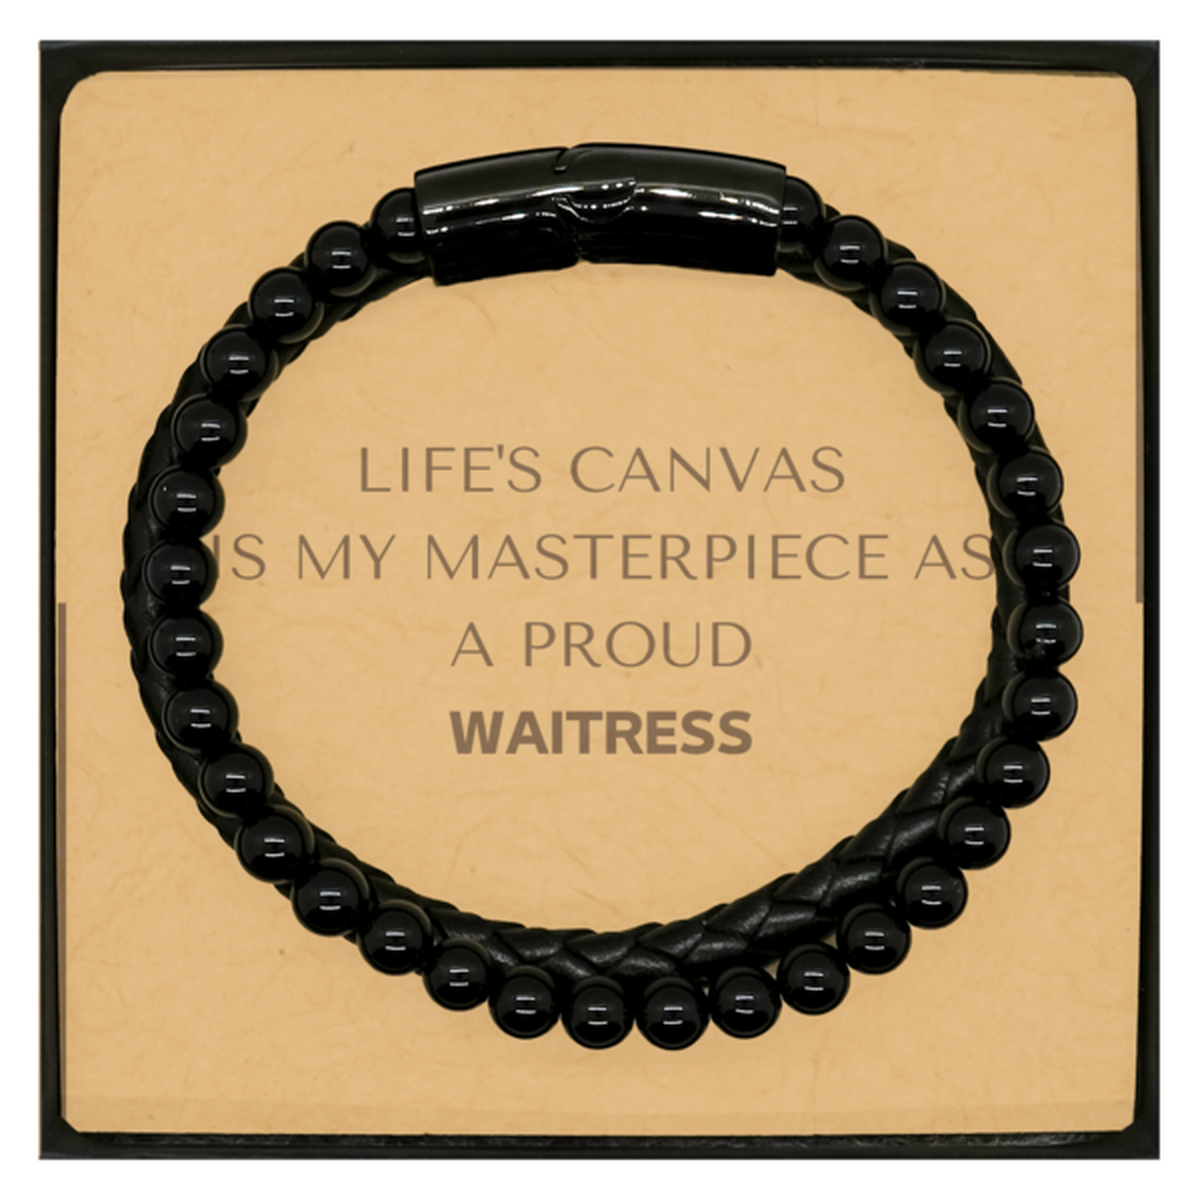 Proud Waitress Gifts, Life's canvas is my masterpiece, Epic Birthday Christmas Unique Stone Leather Bracelets For Waitress, Coworkers, Men, Women, Friends